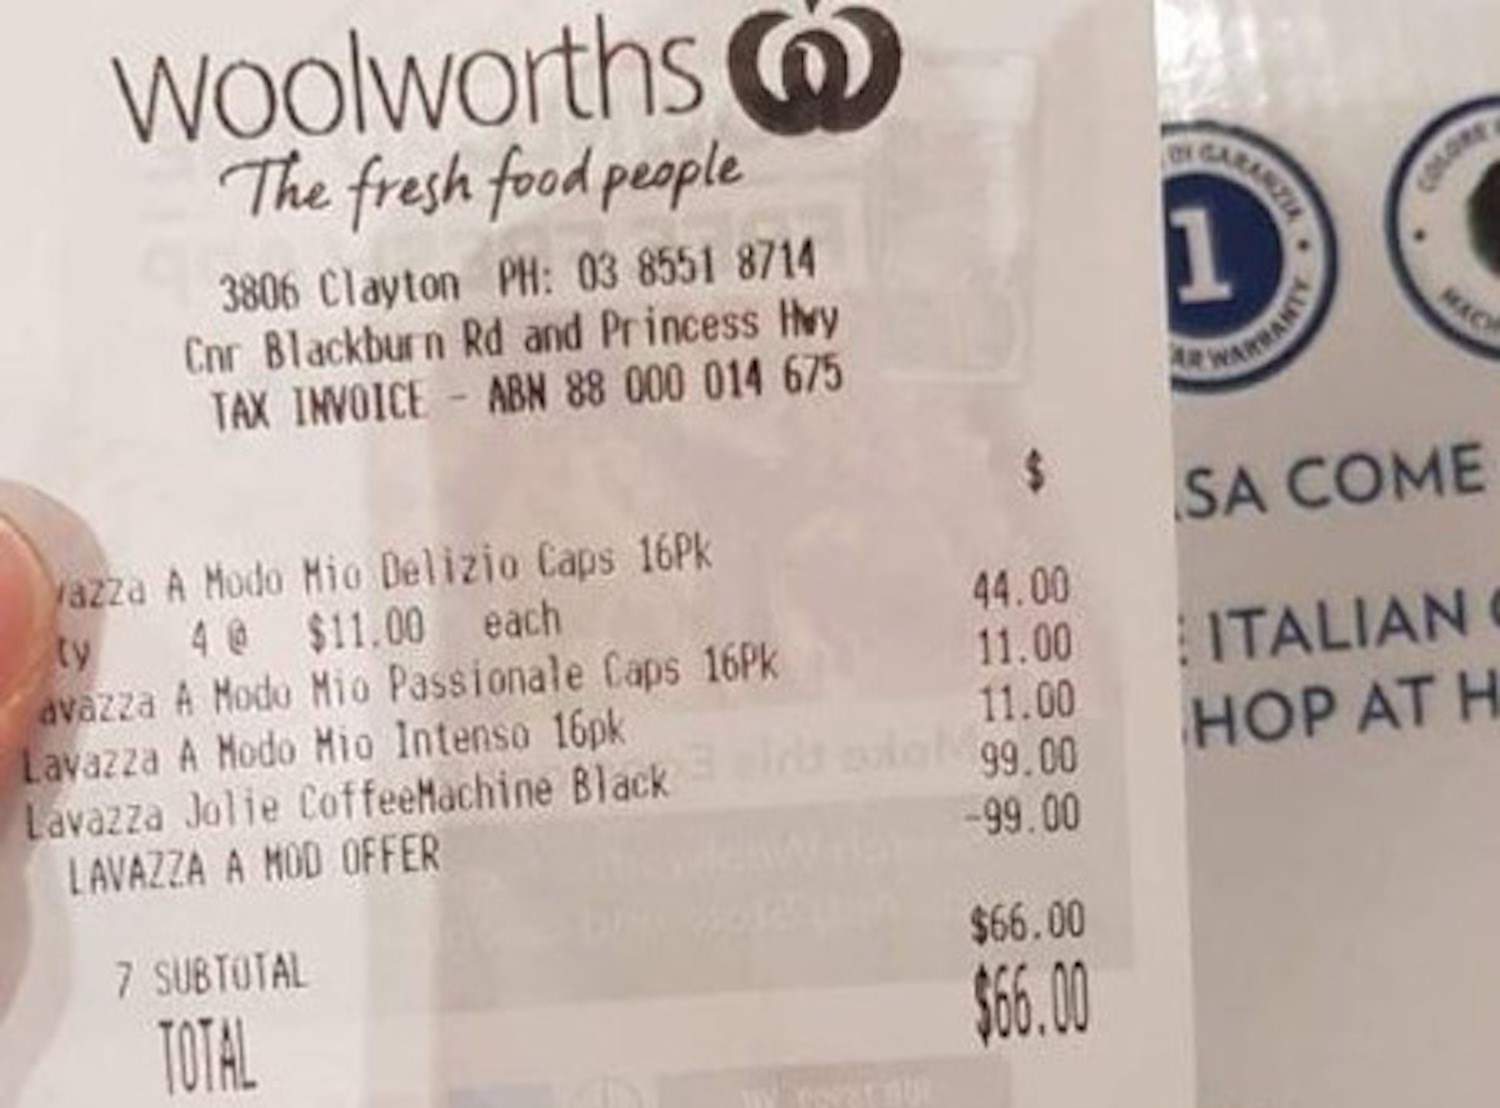 Woolworths is giving away free 99 coffee machines